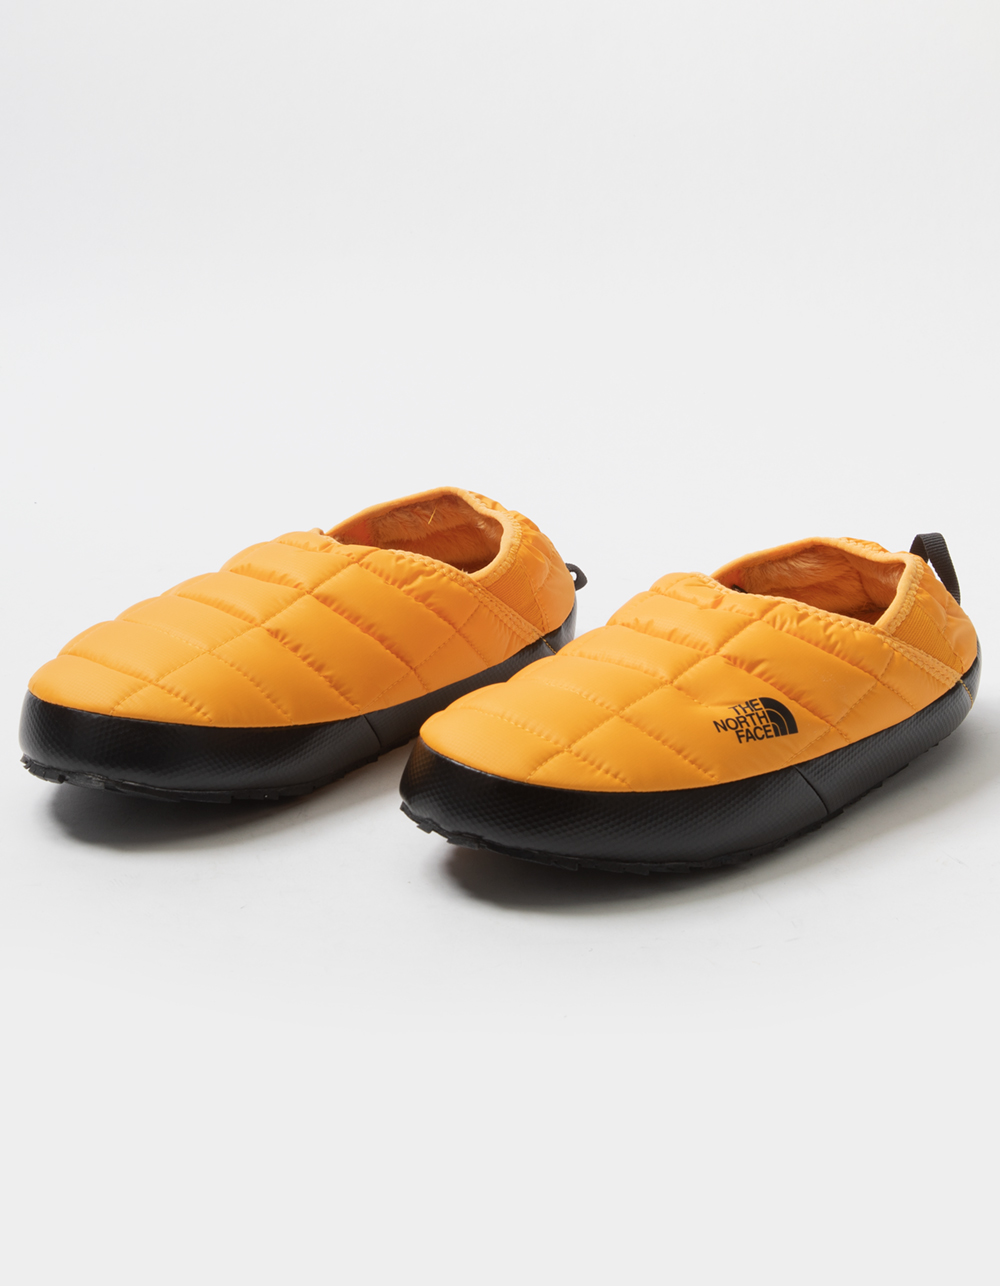 THE NORTH FACE Thermoball™ Traction Mule V Shoes - YELLOW | Tillys